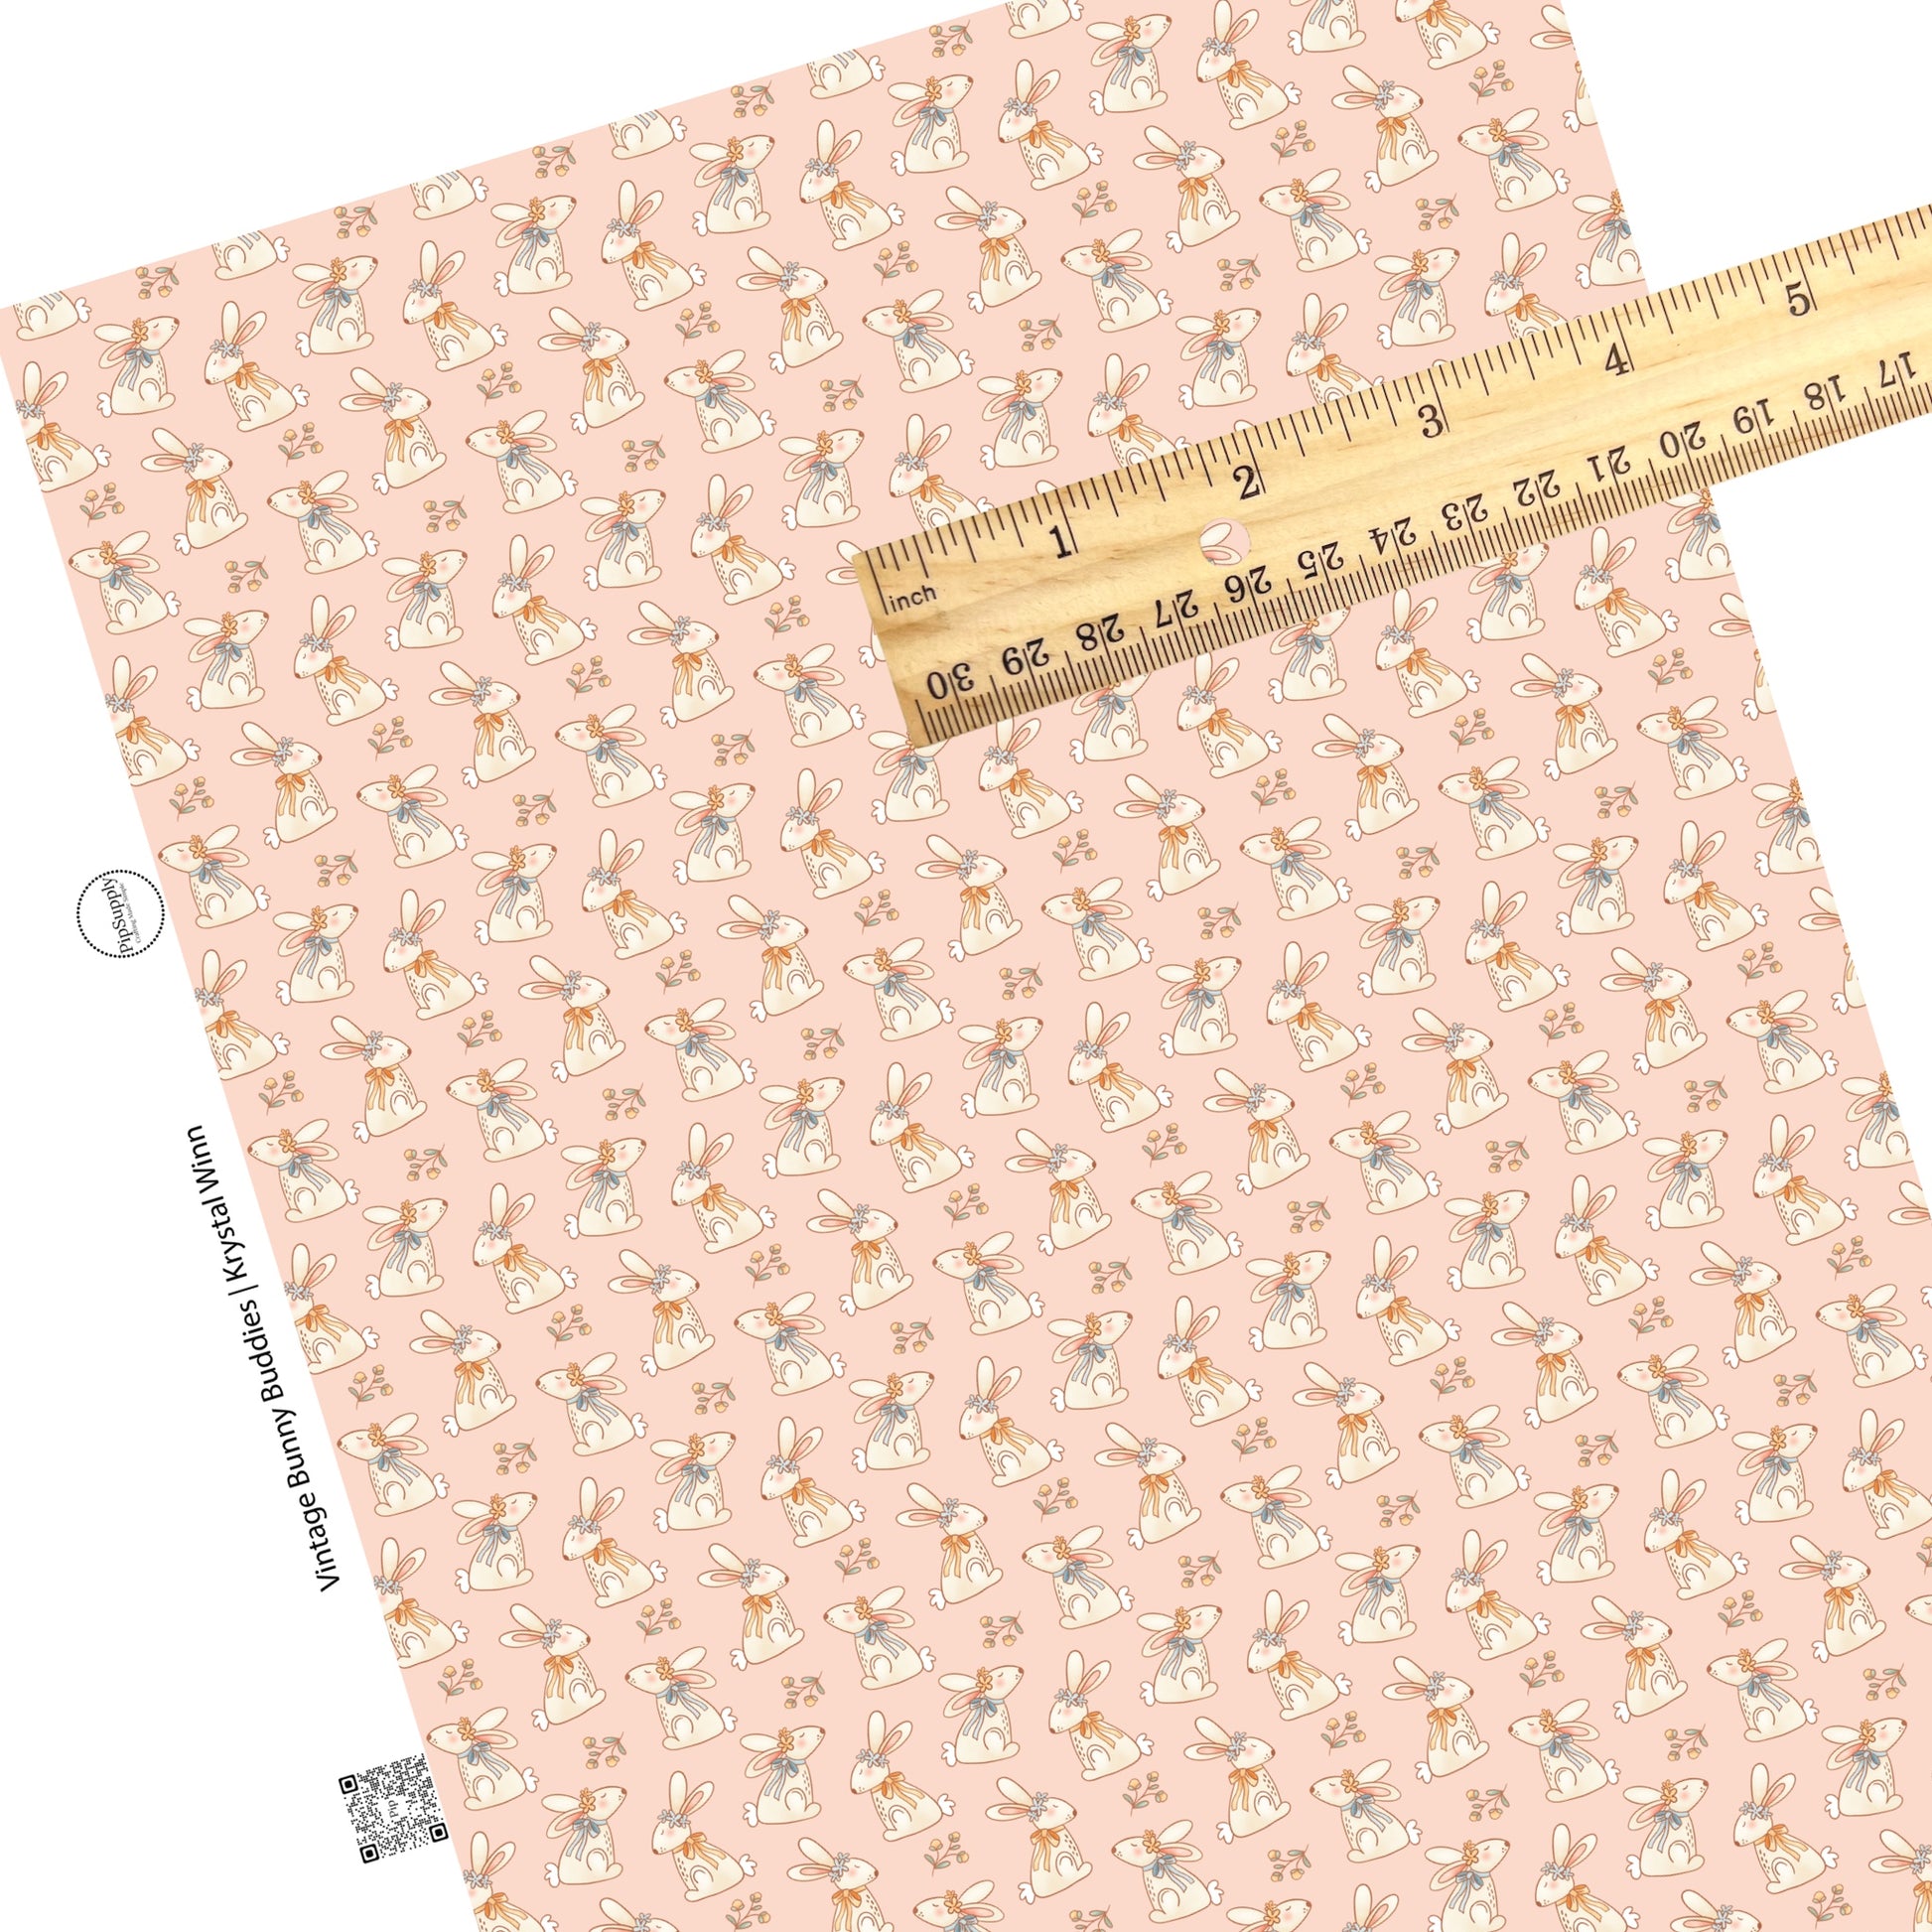 bunnies with orange and blue bow ties and floral crowns with flowers on pink faux leather sheets